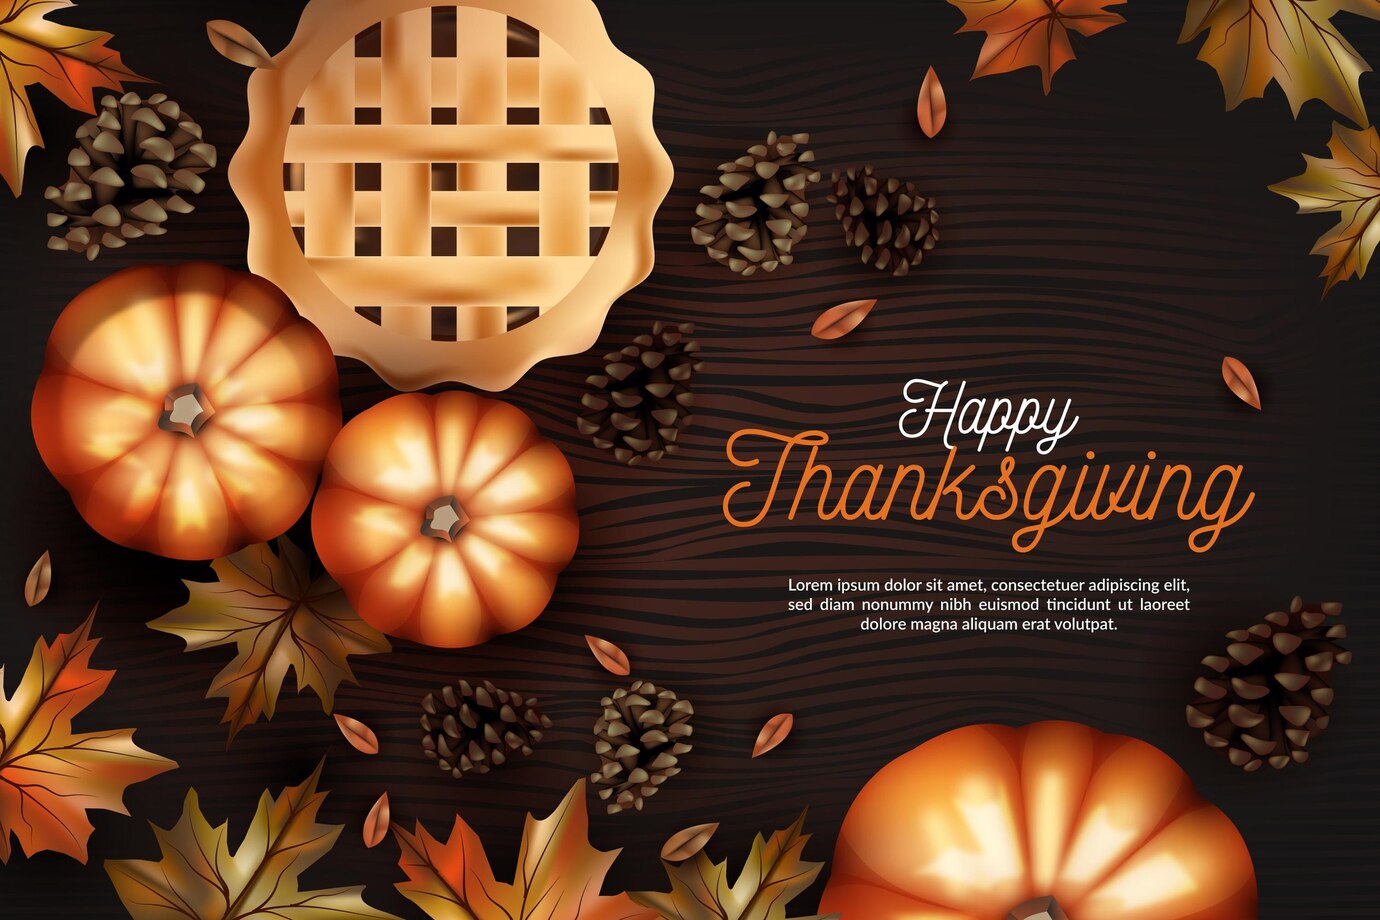 Realistic Design Thanksgiving Background 52683 47391